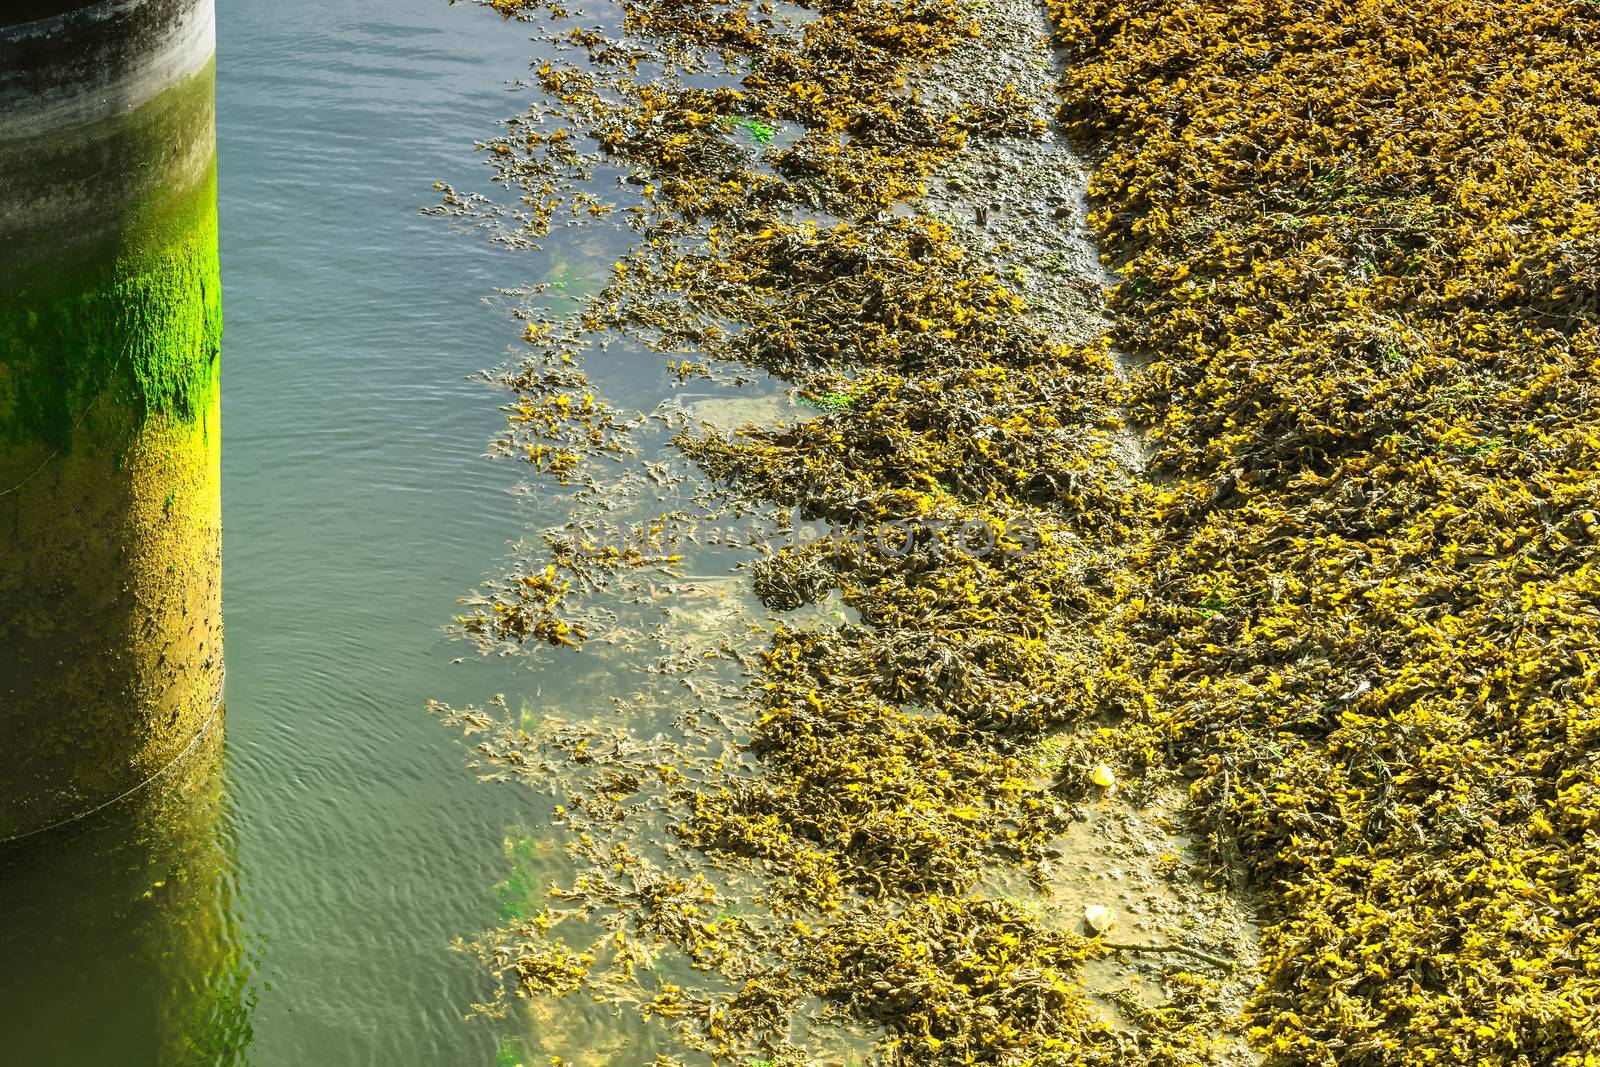 Seaweed and algae along the coast by JFsPic